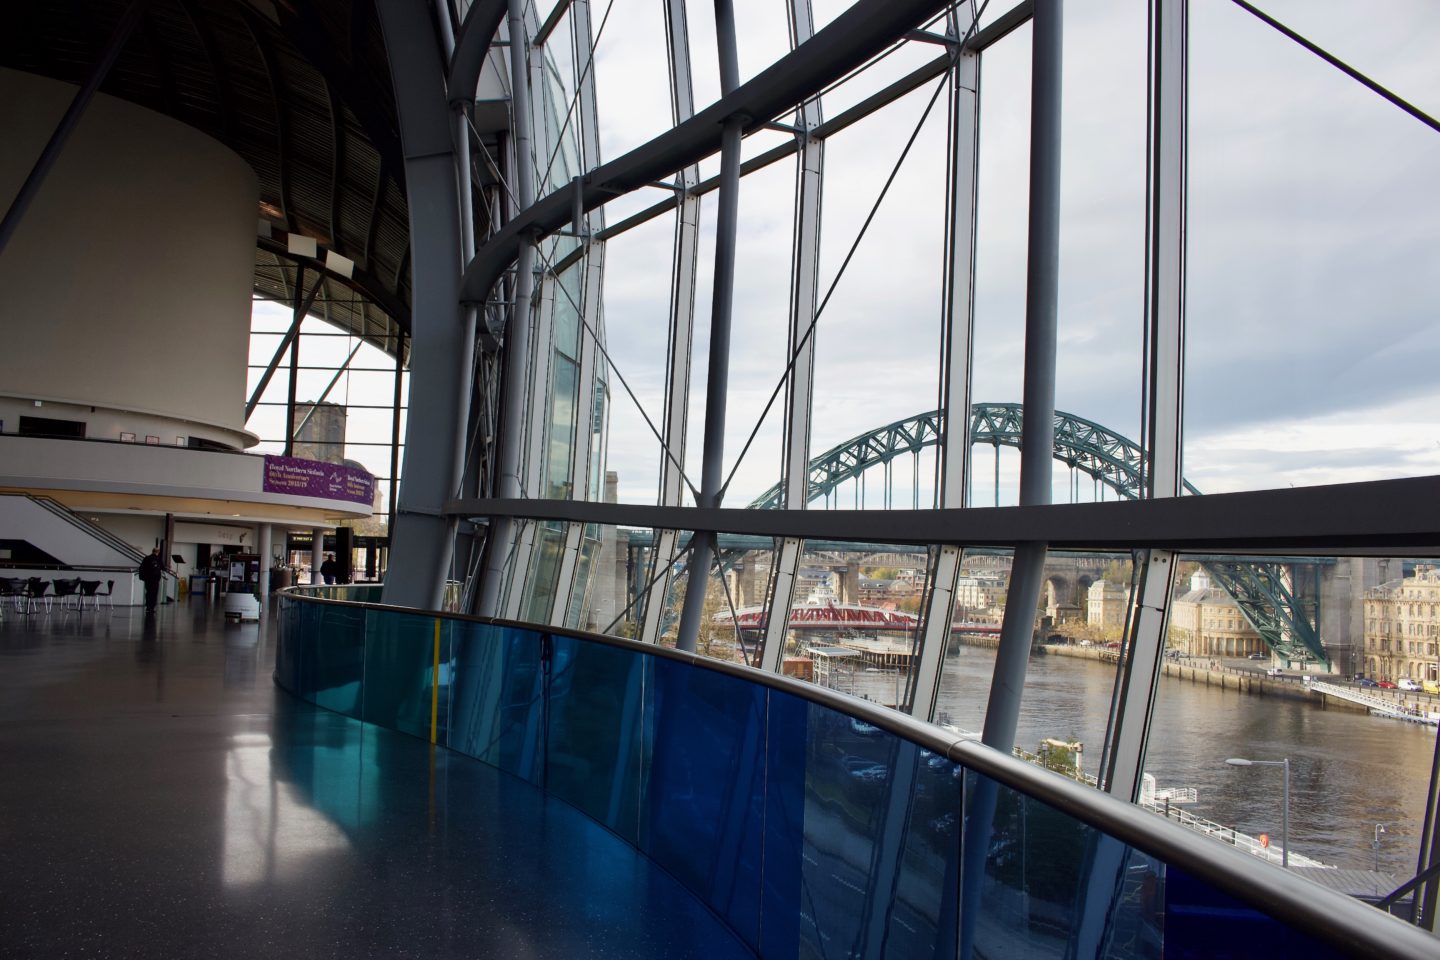 Inside Sage Gateshead with a view of the Tyne Bridge. Sage Gateshead Music Live Under Five: Mini Musicians review